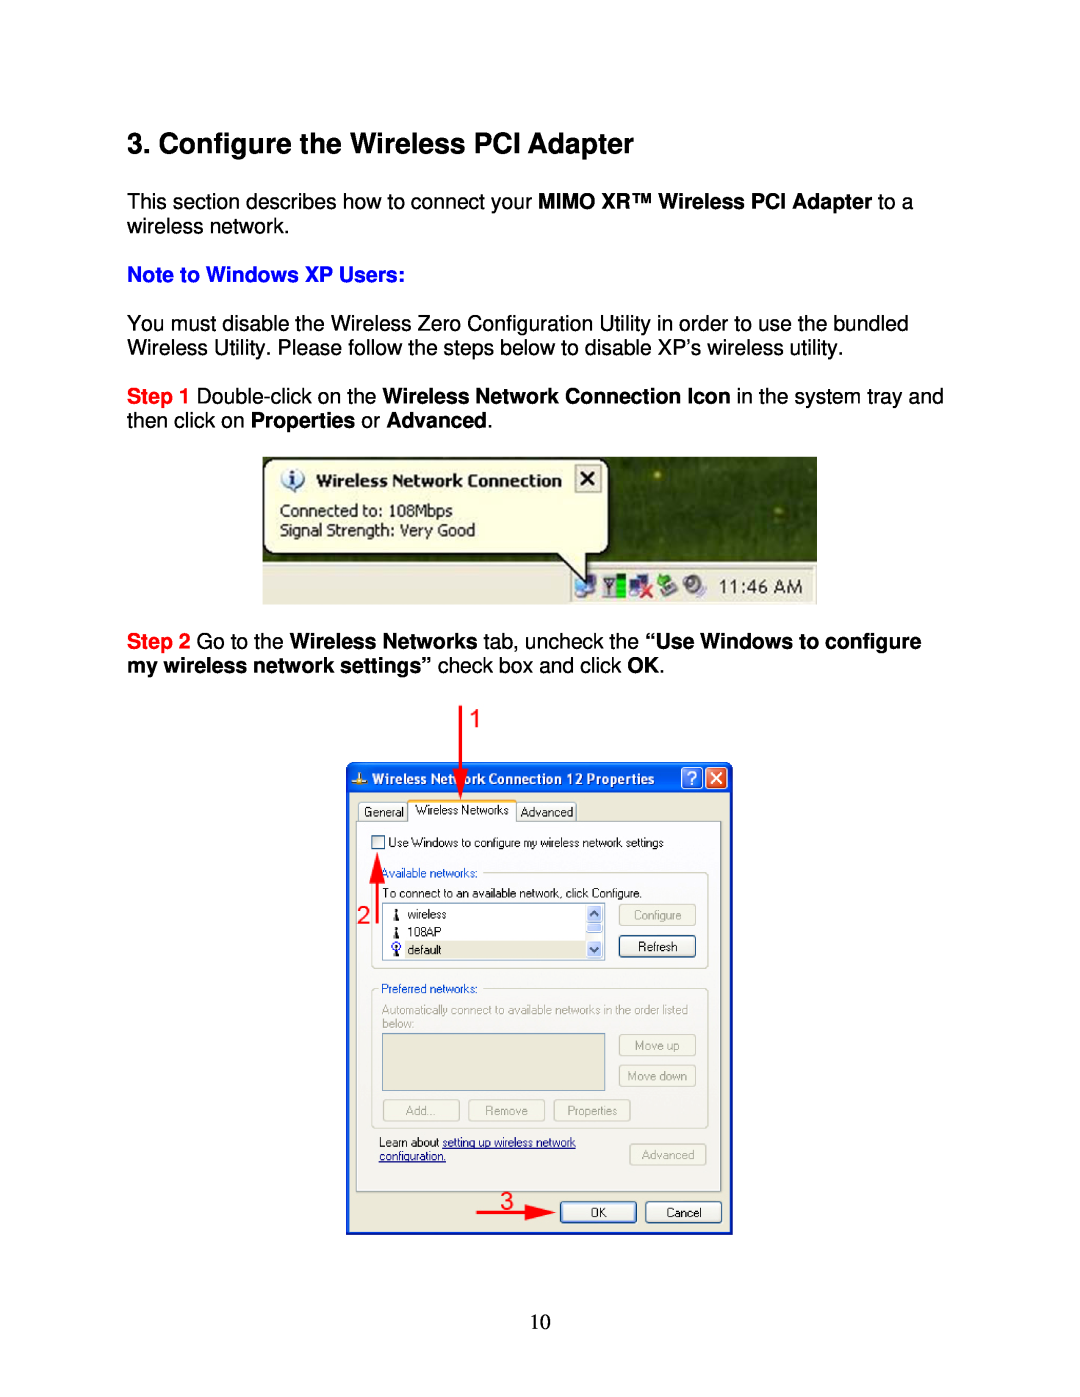 Airlink101 AWLH5026 user manual Configure the Wireless PCI Adapter, Note to Windows XP Users 